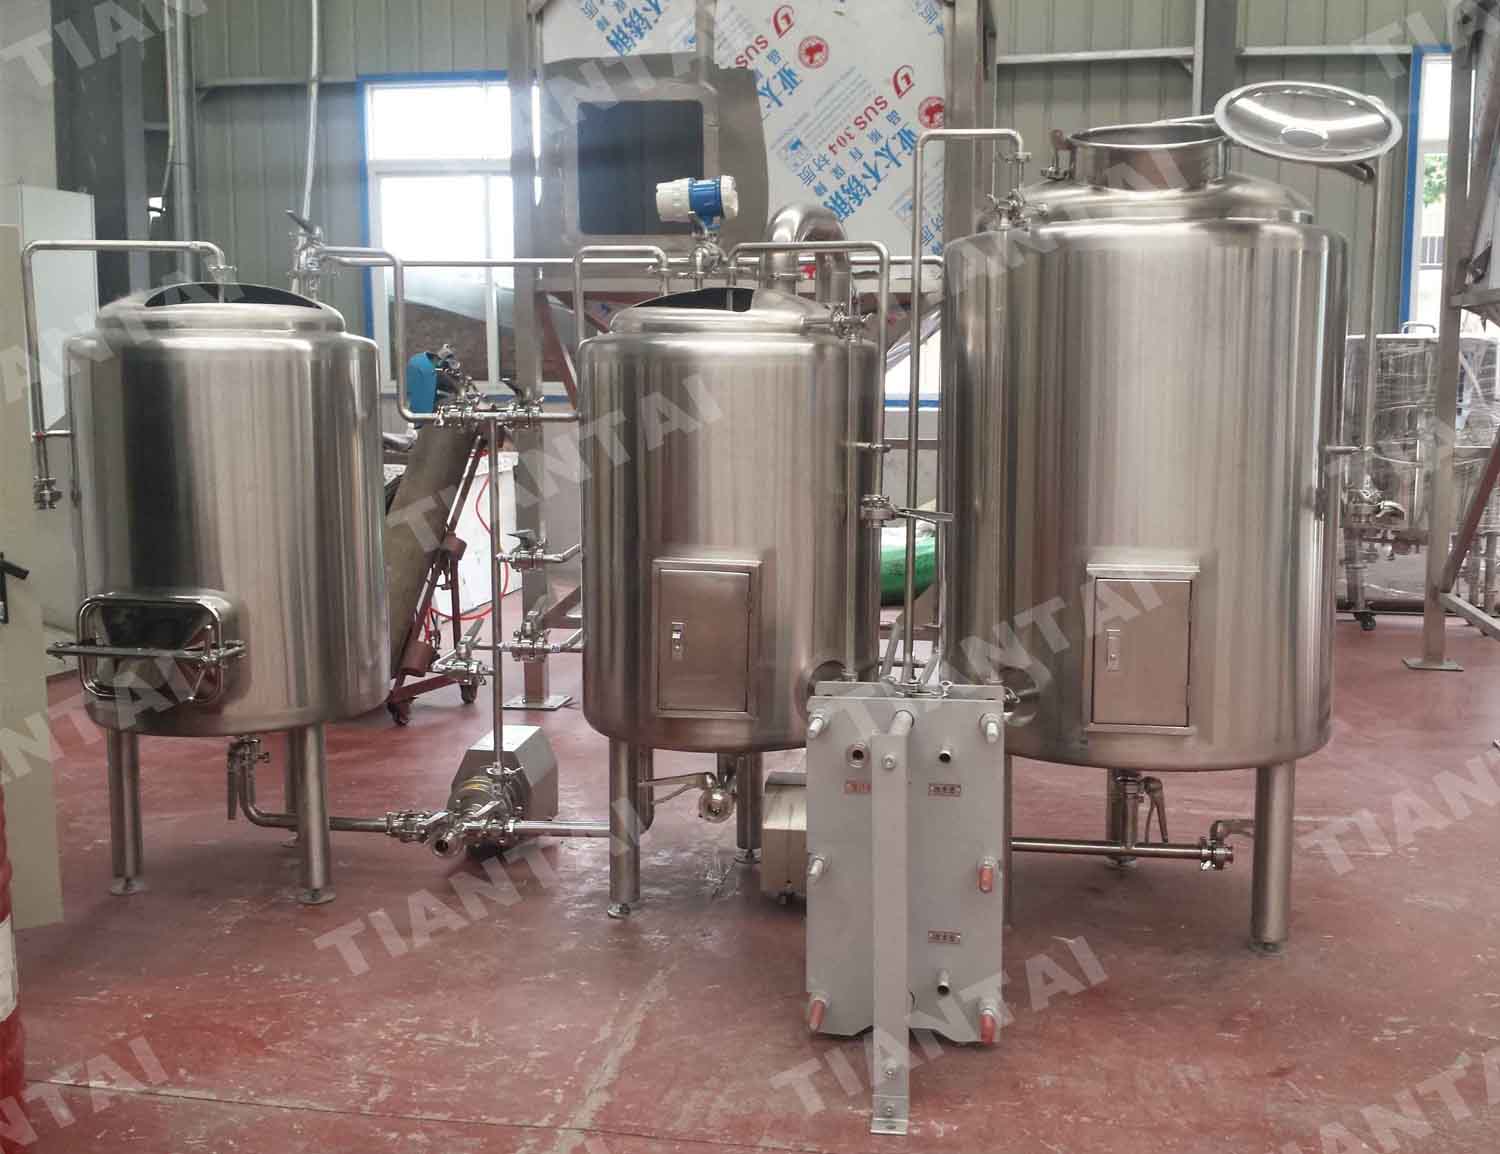 200L beer brewery equipment